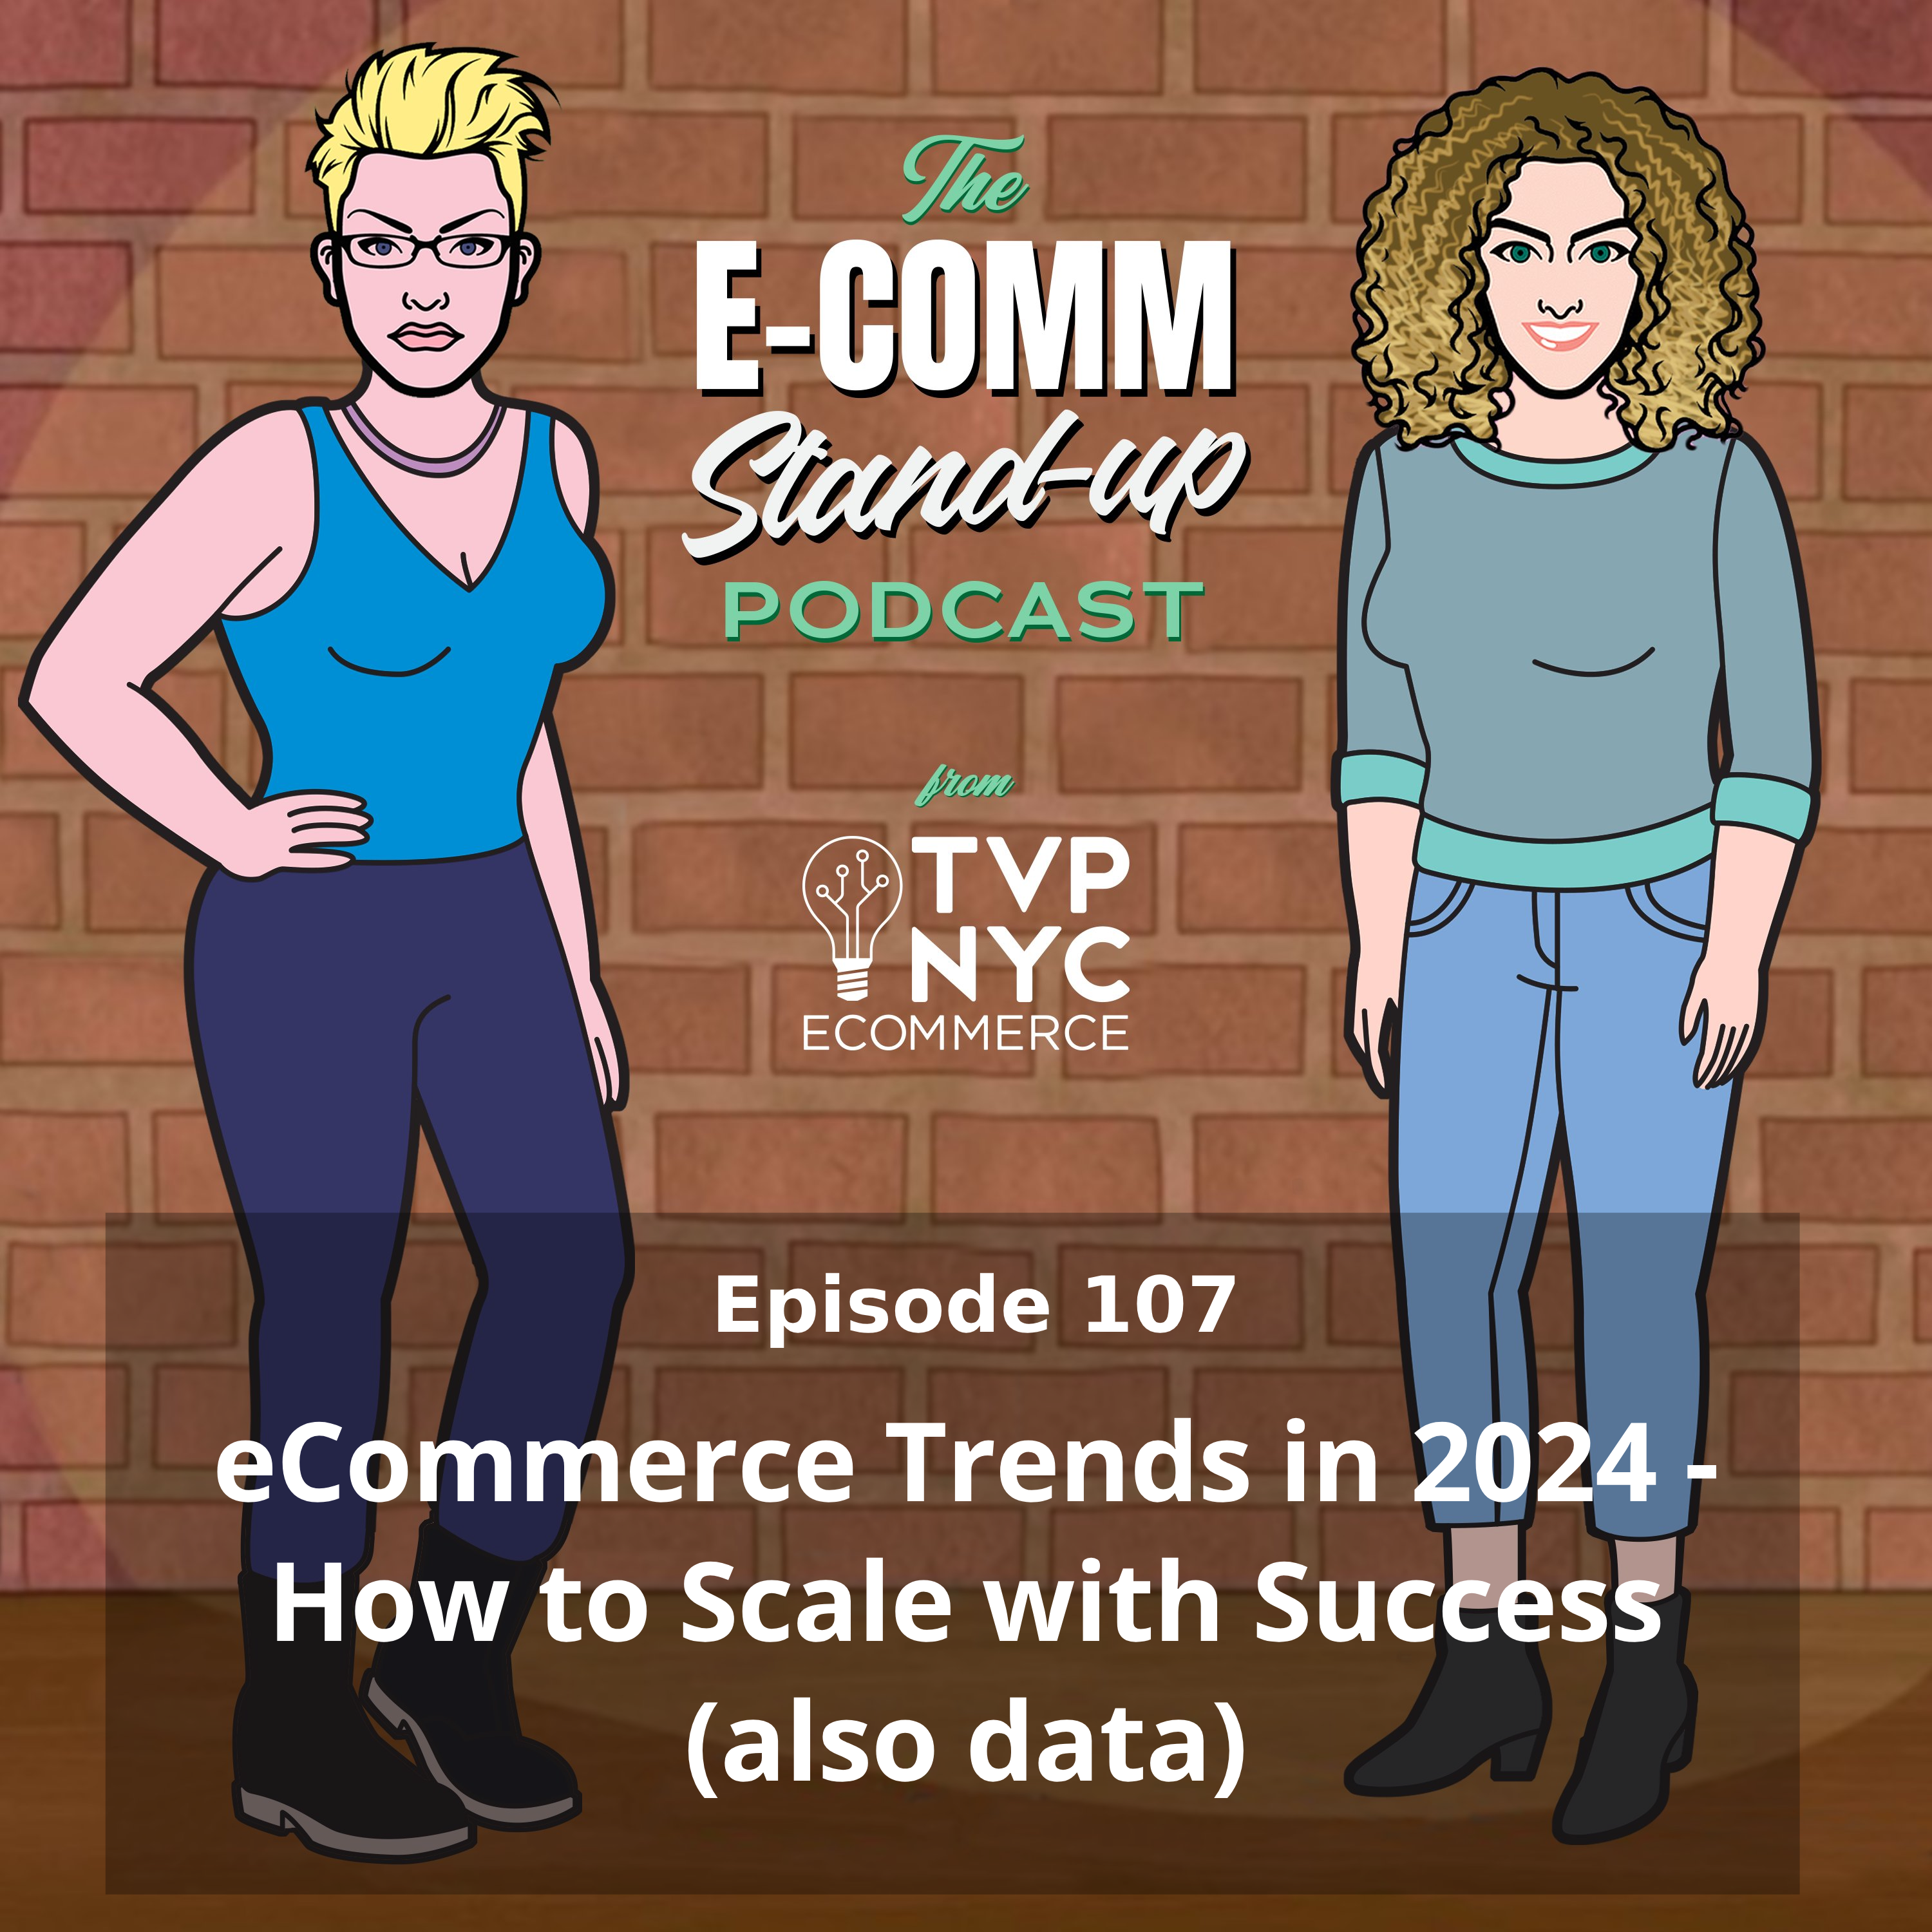 eCommerce Trends in 2024 - How to Scale with Success (also data)